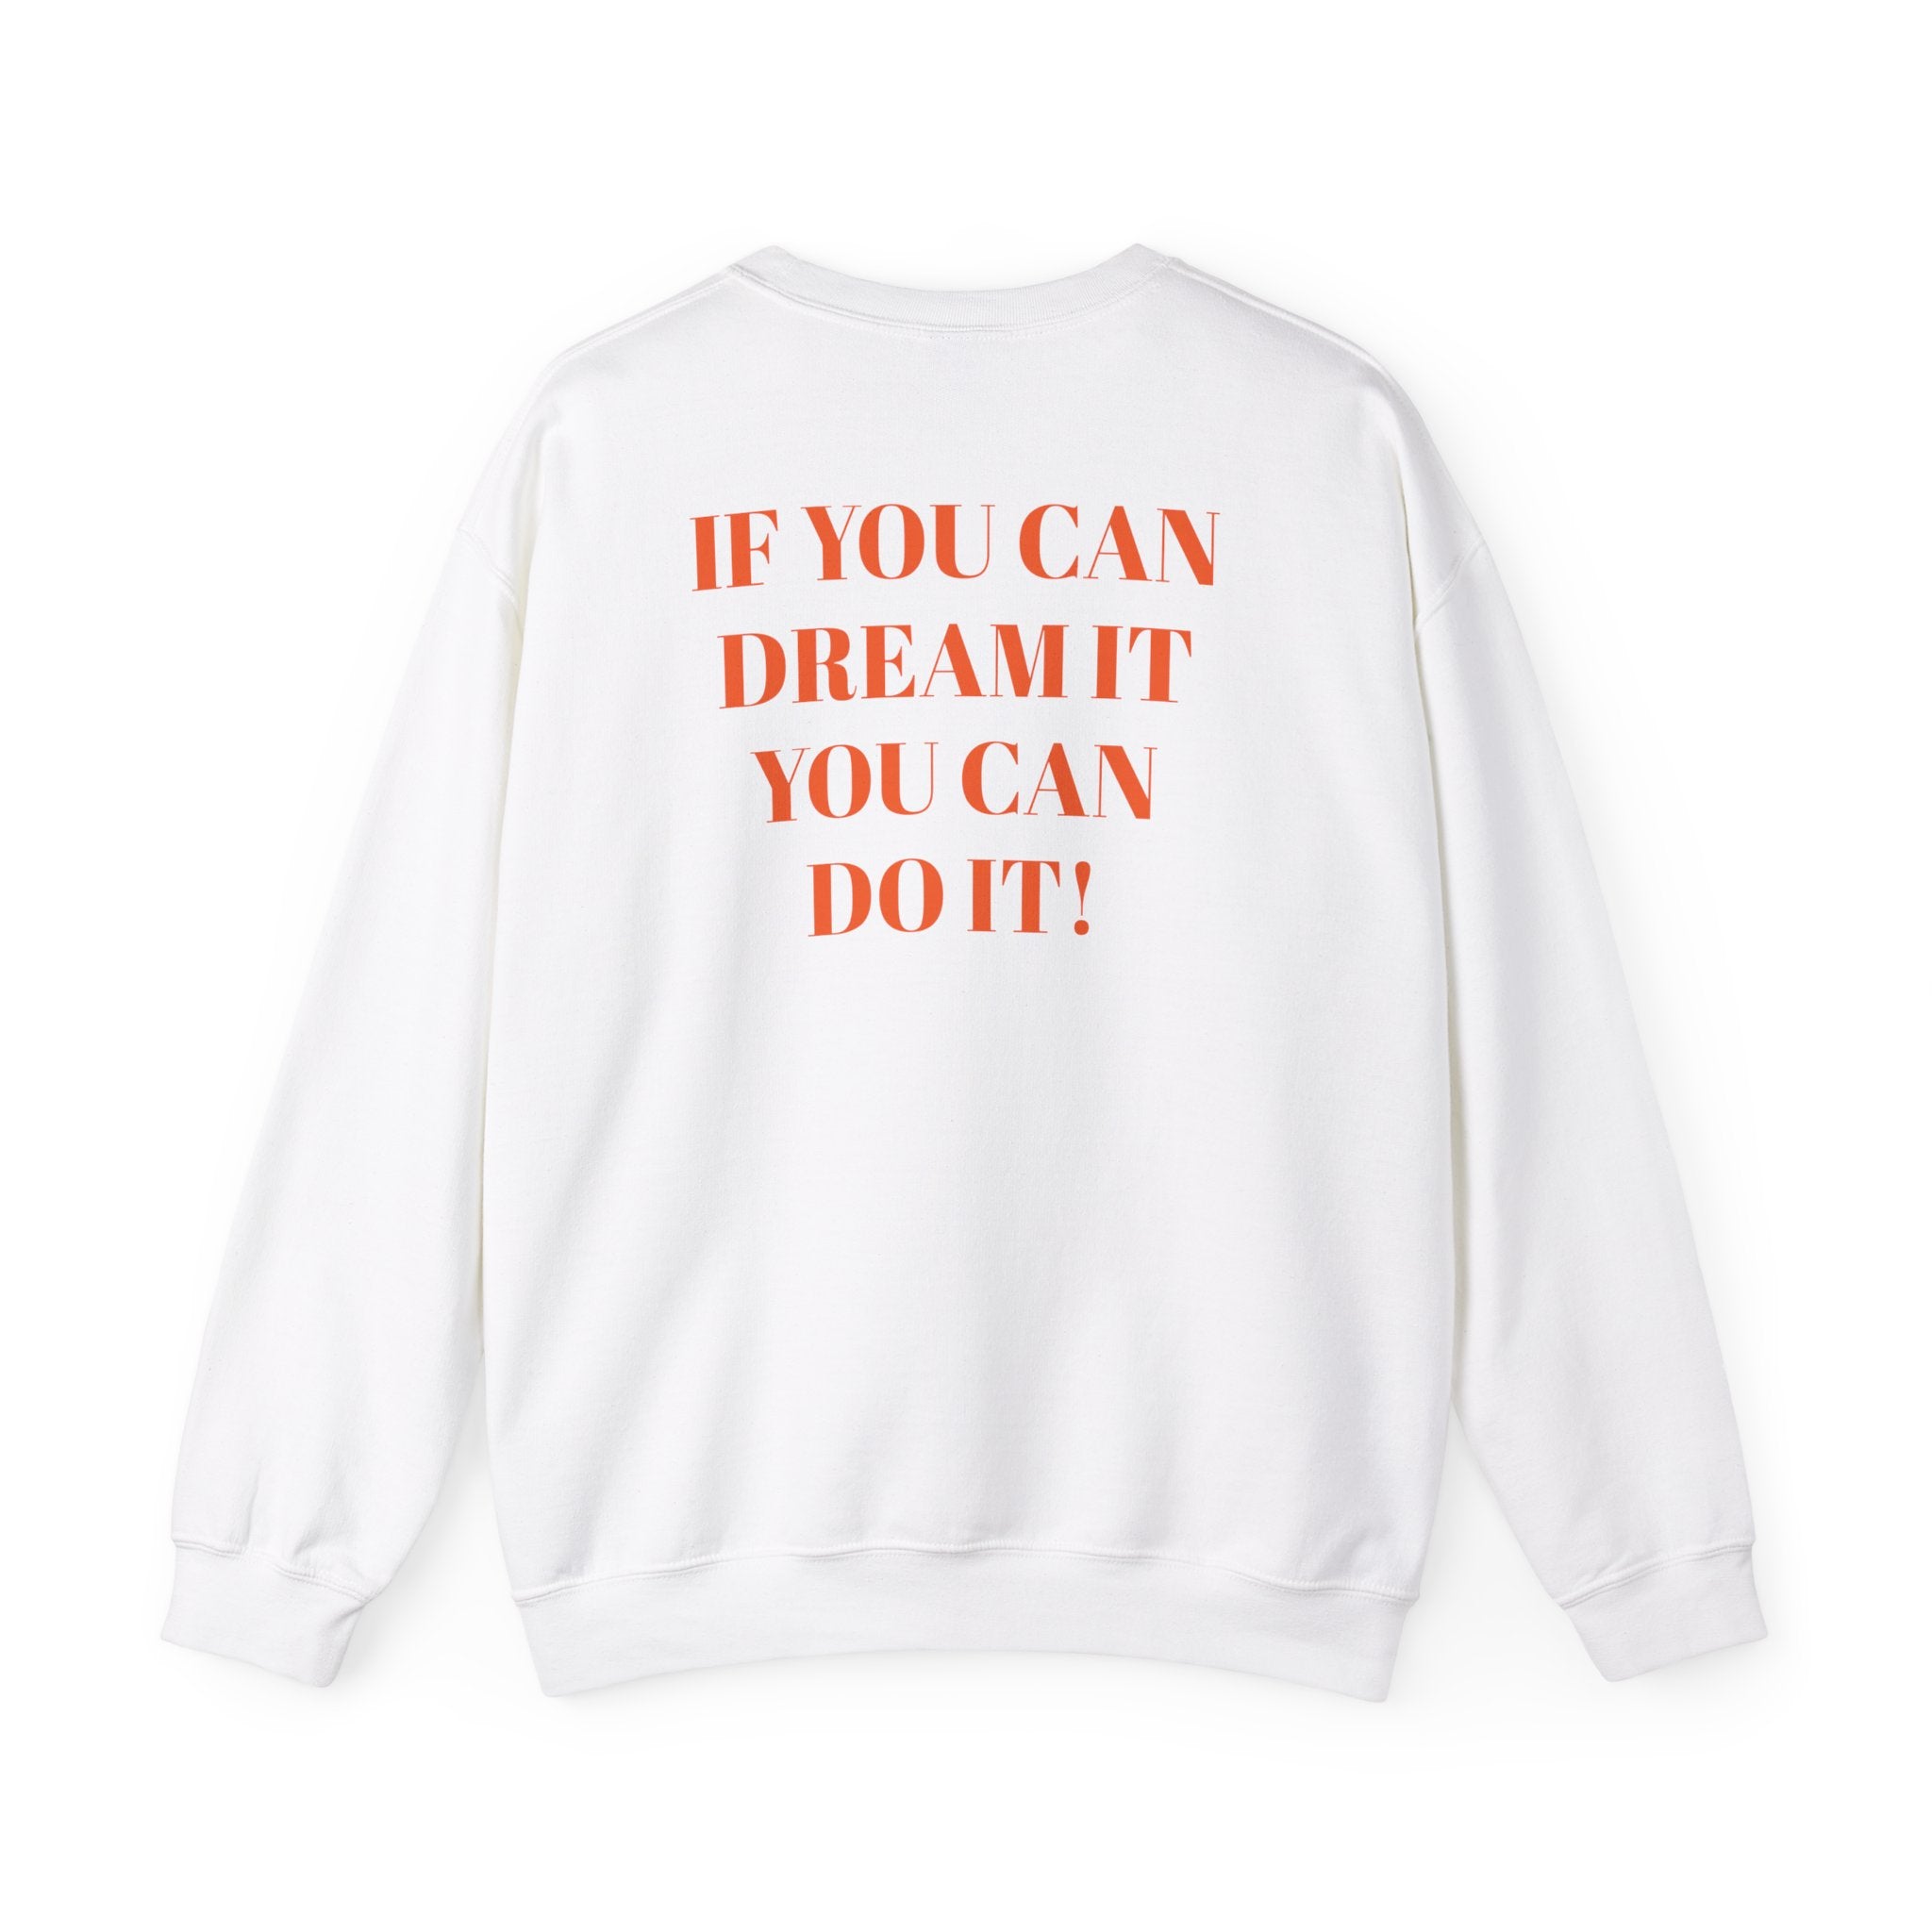 IF YOU CAN DREAM IT YOU CAN DO IT Crewneck Sweatshirt